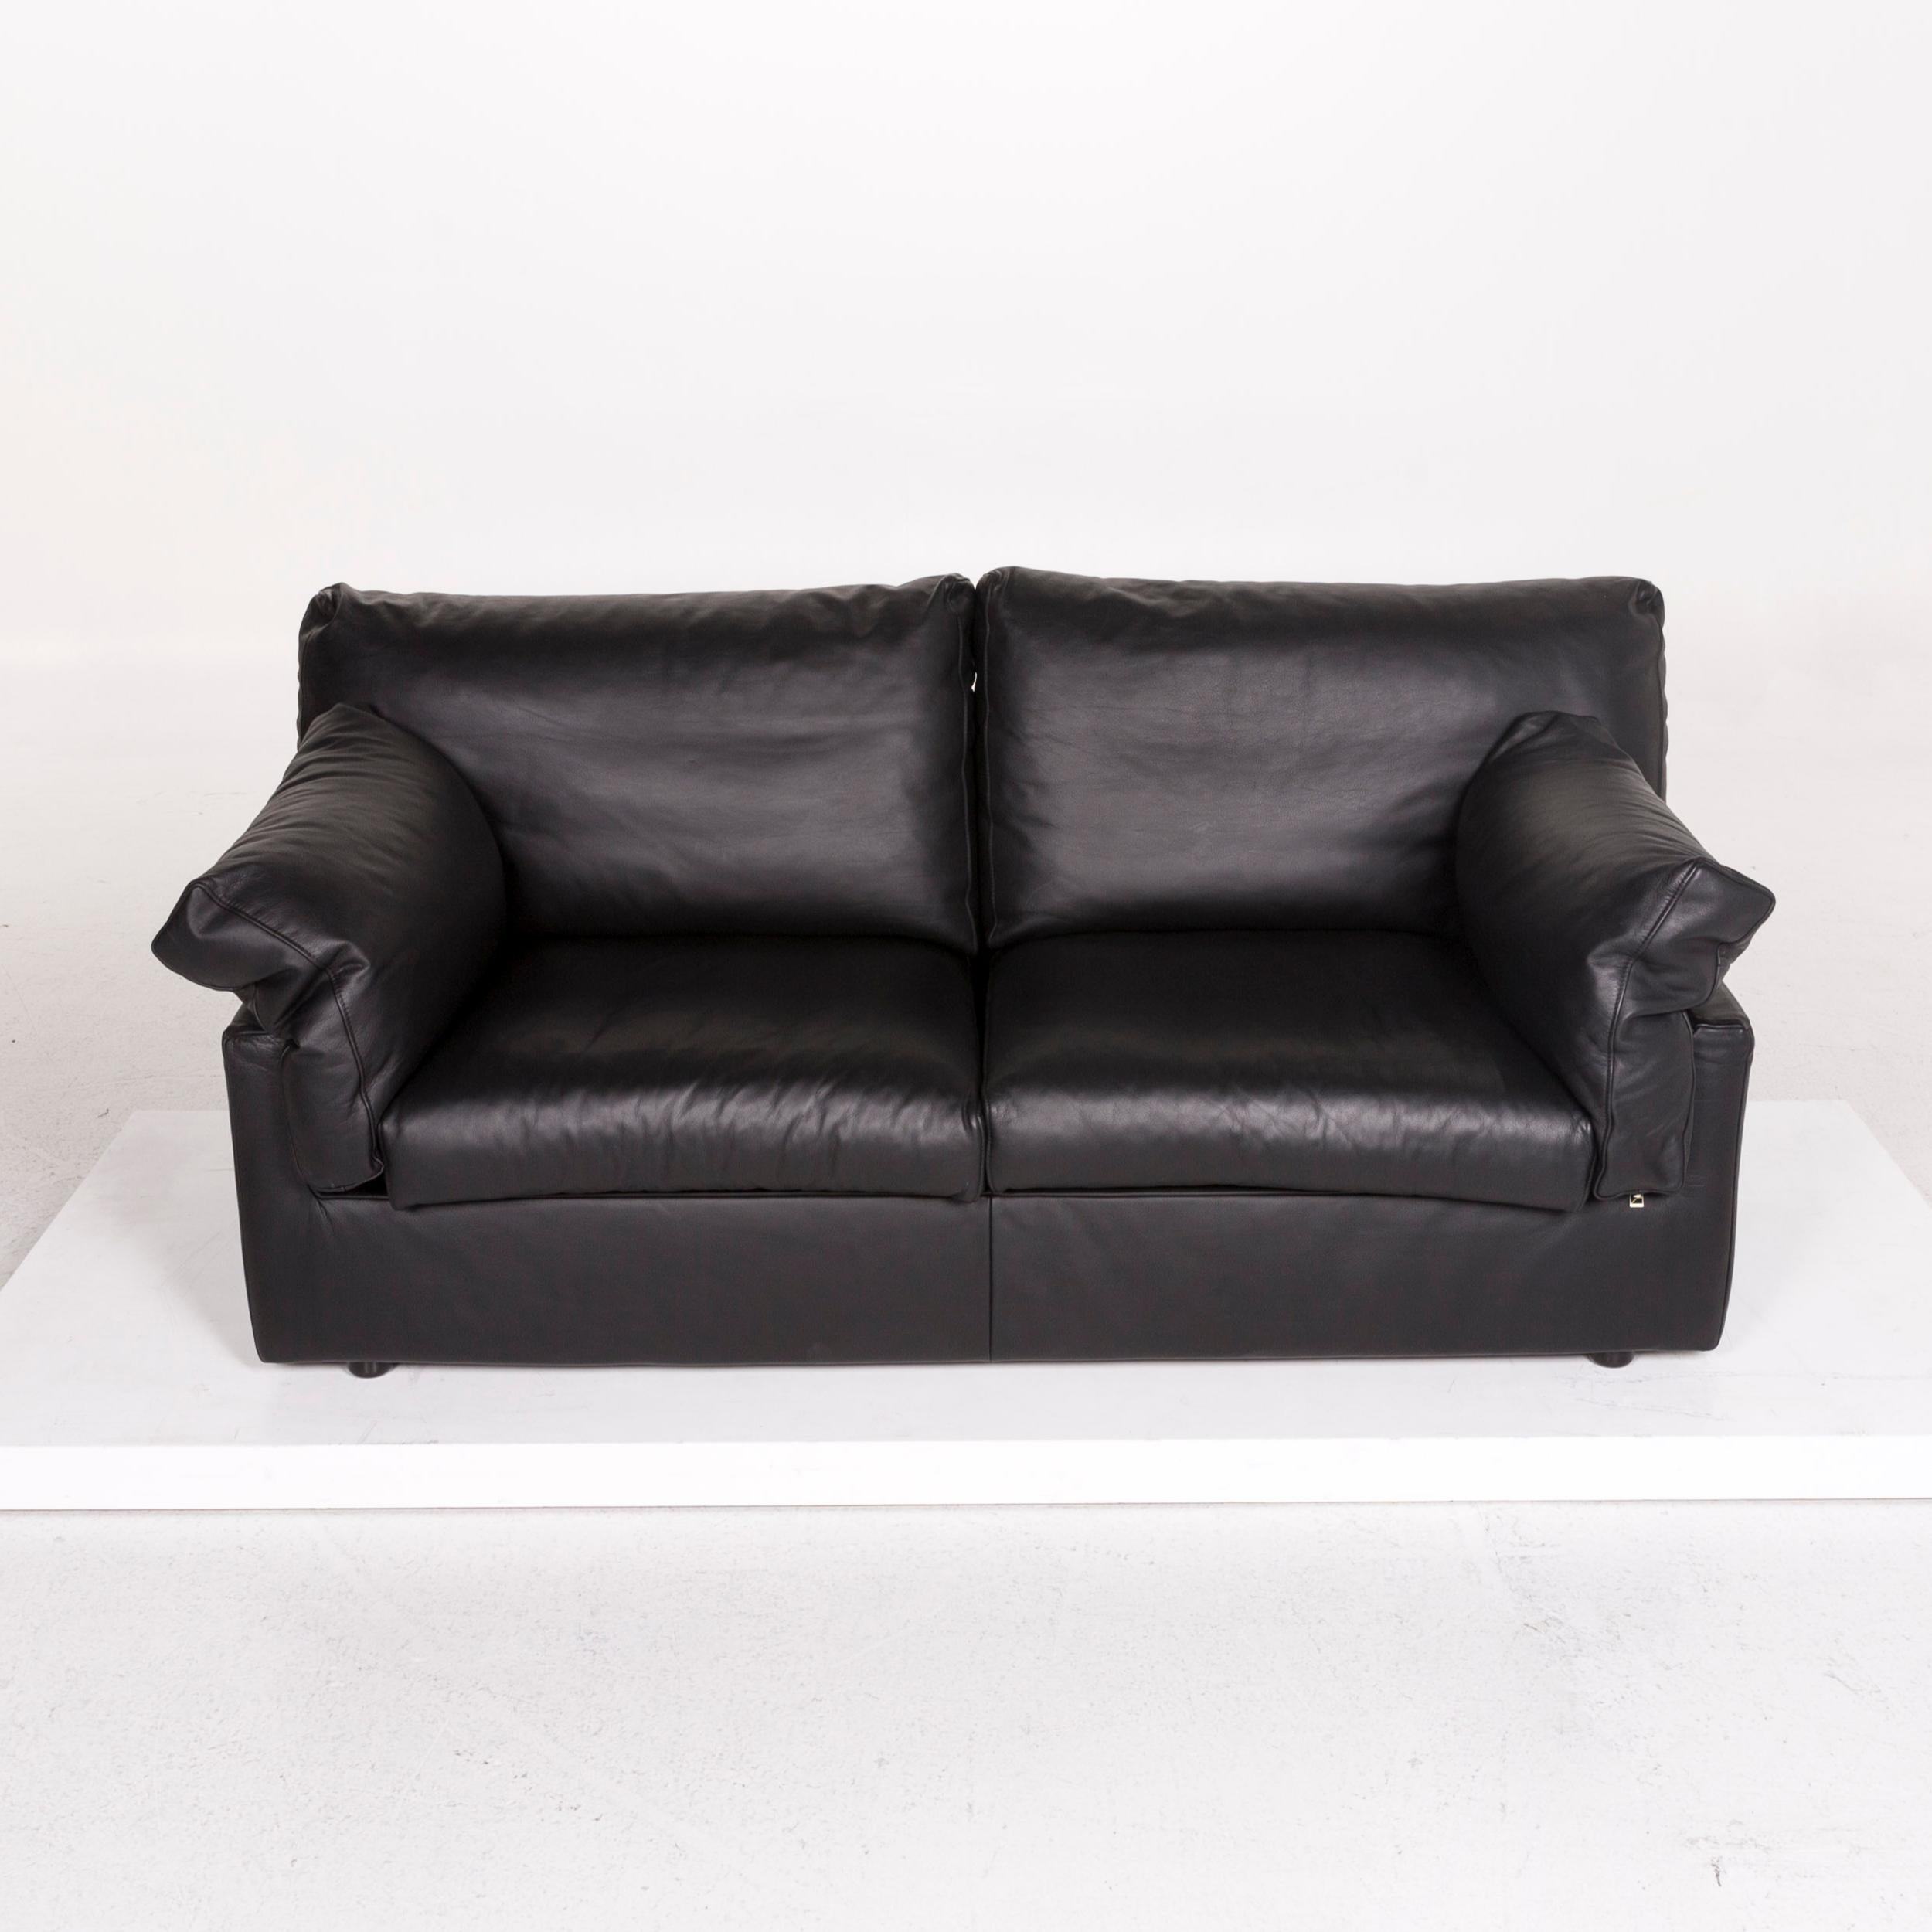 Contemporary WK Living Leather Sofa Black Two-Seat Couch